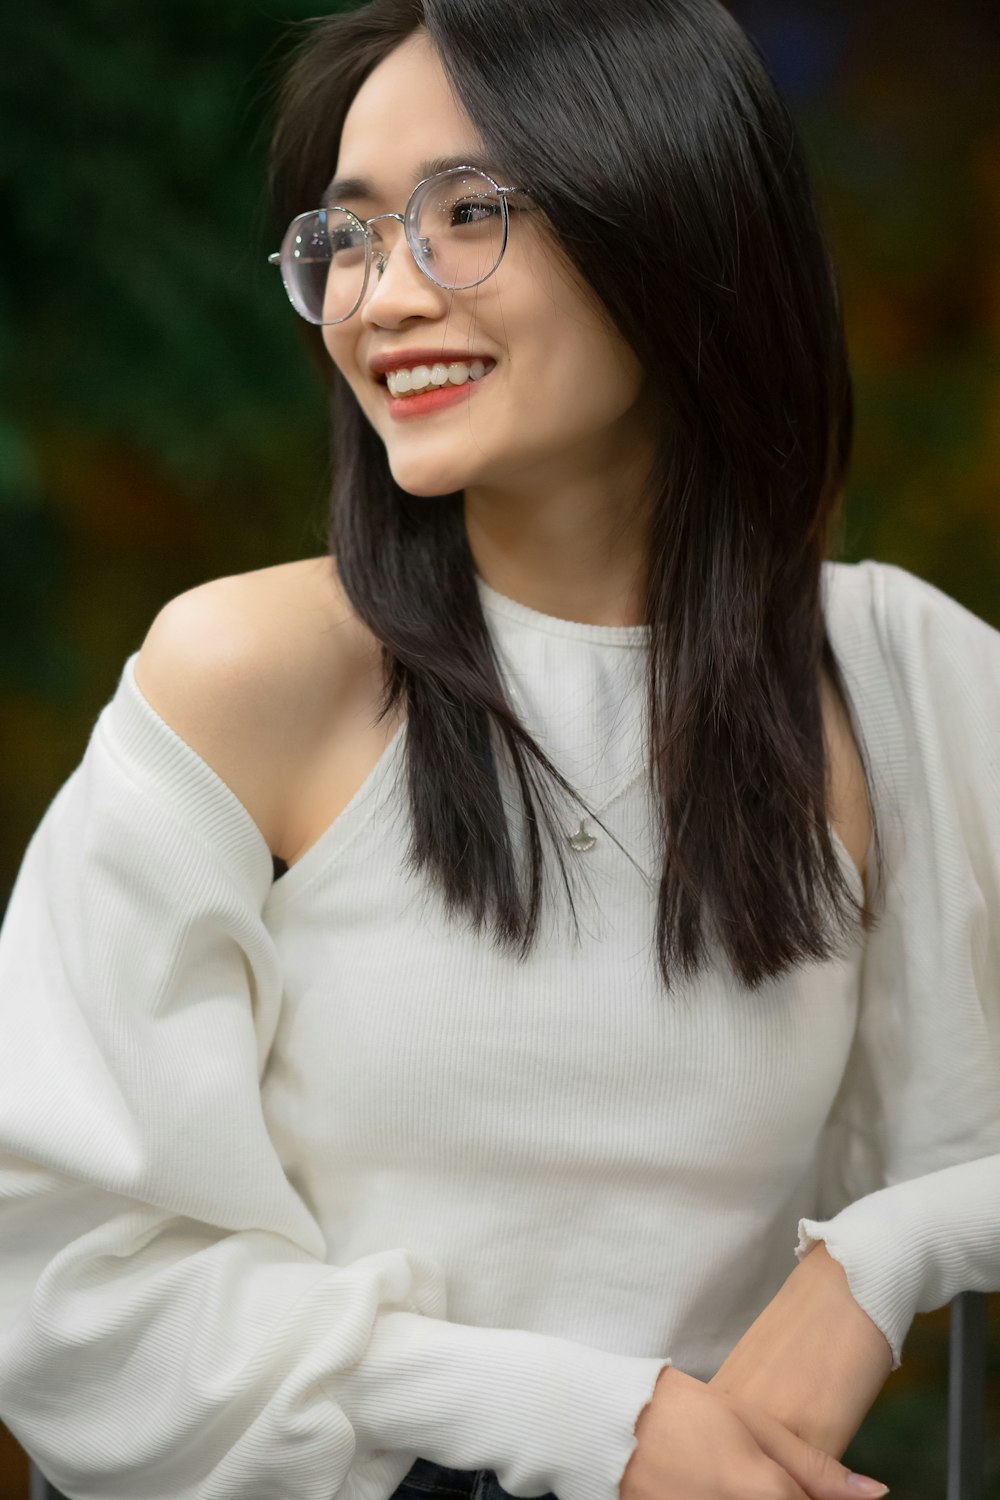 a woman wearing glasses and a white top